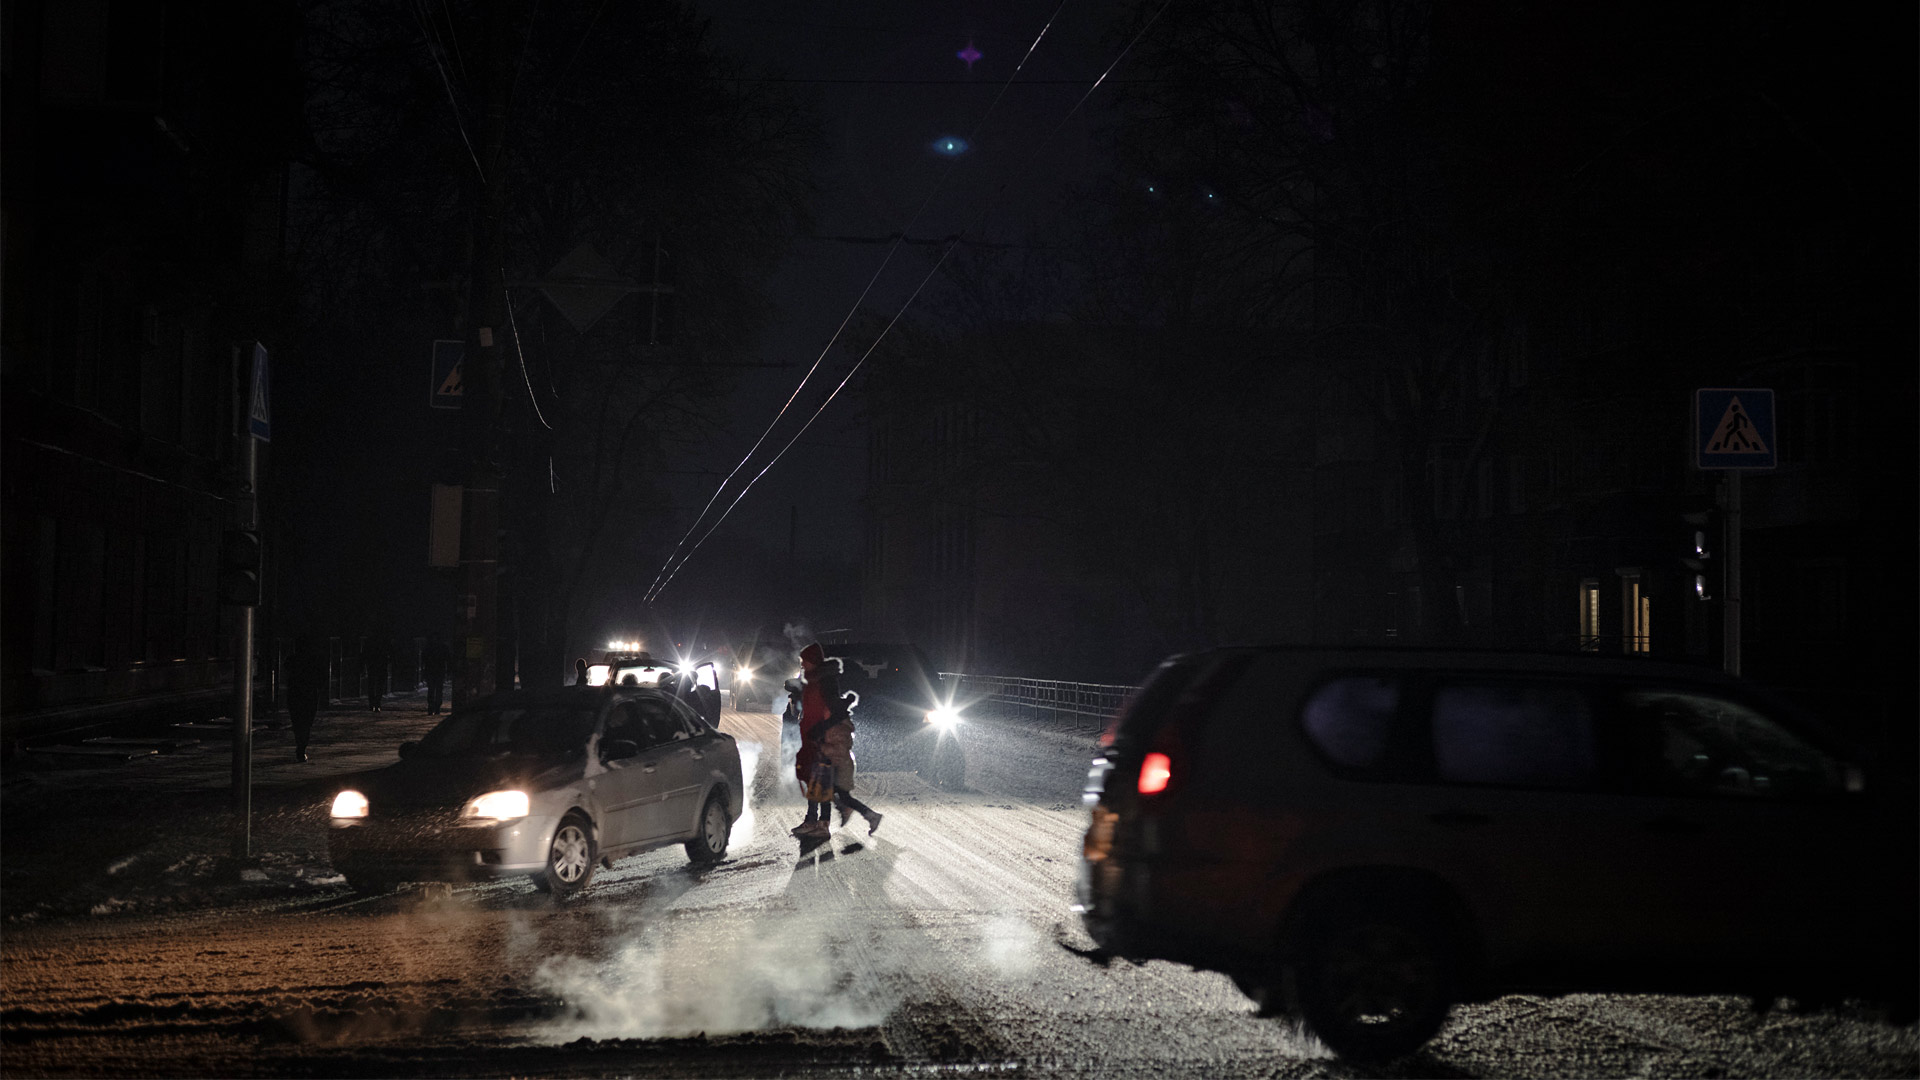 A dark street is only lit up by the light from car headlamps. People cross the street lit up by the headlamps.